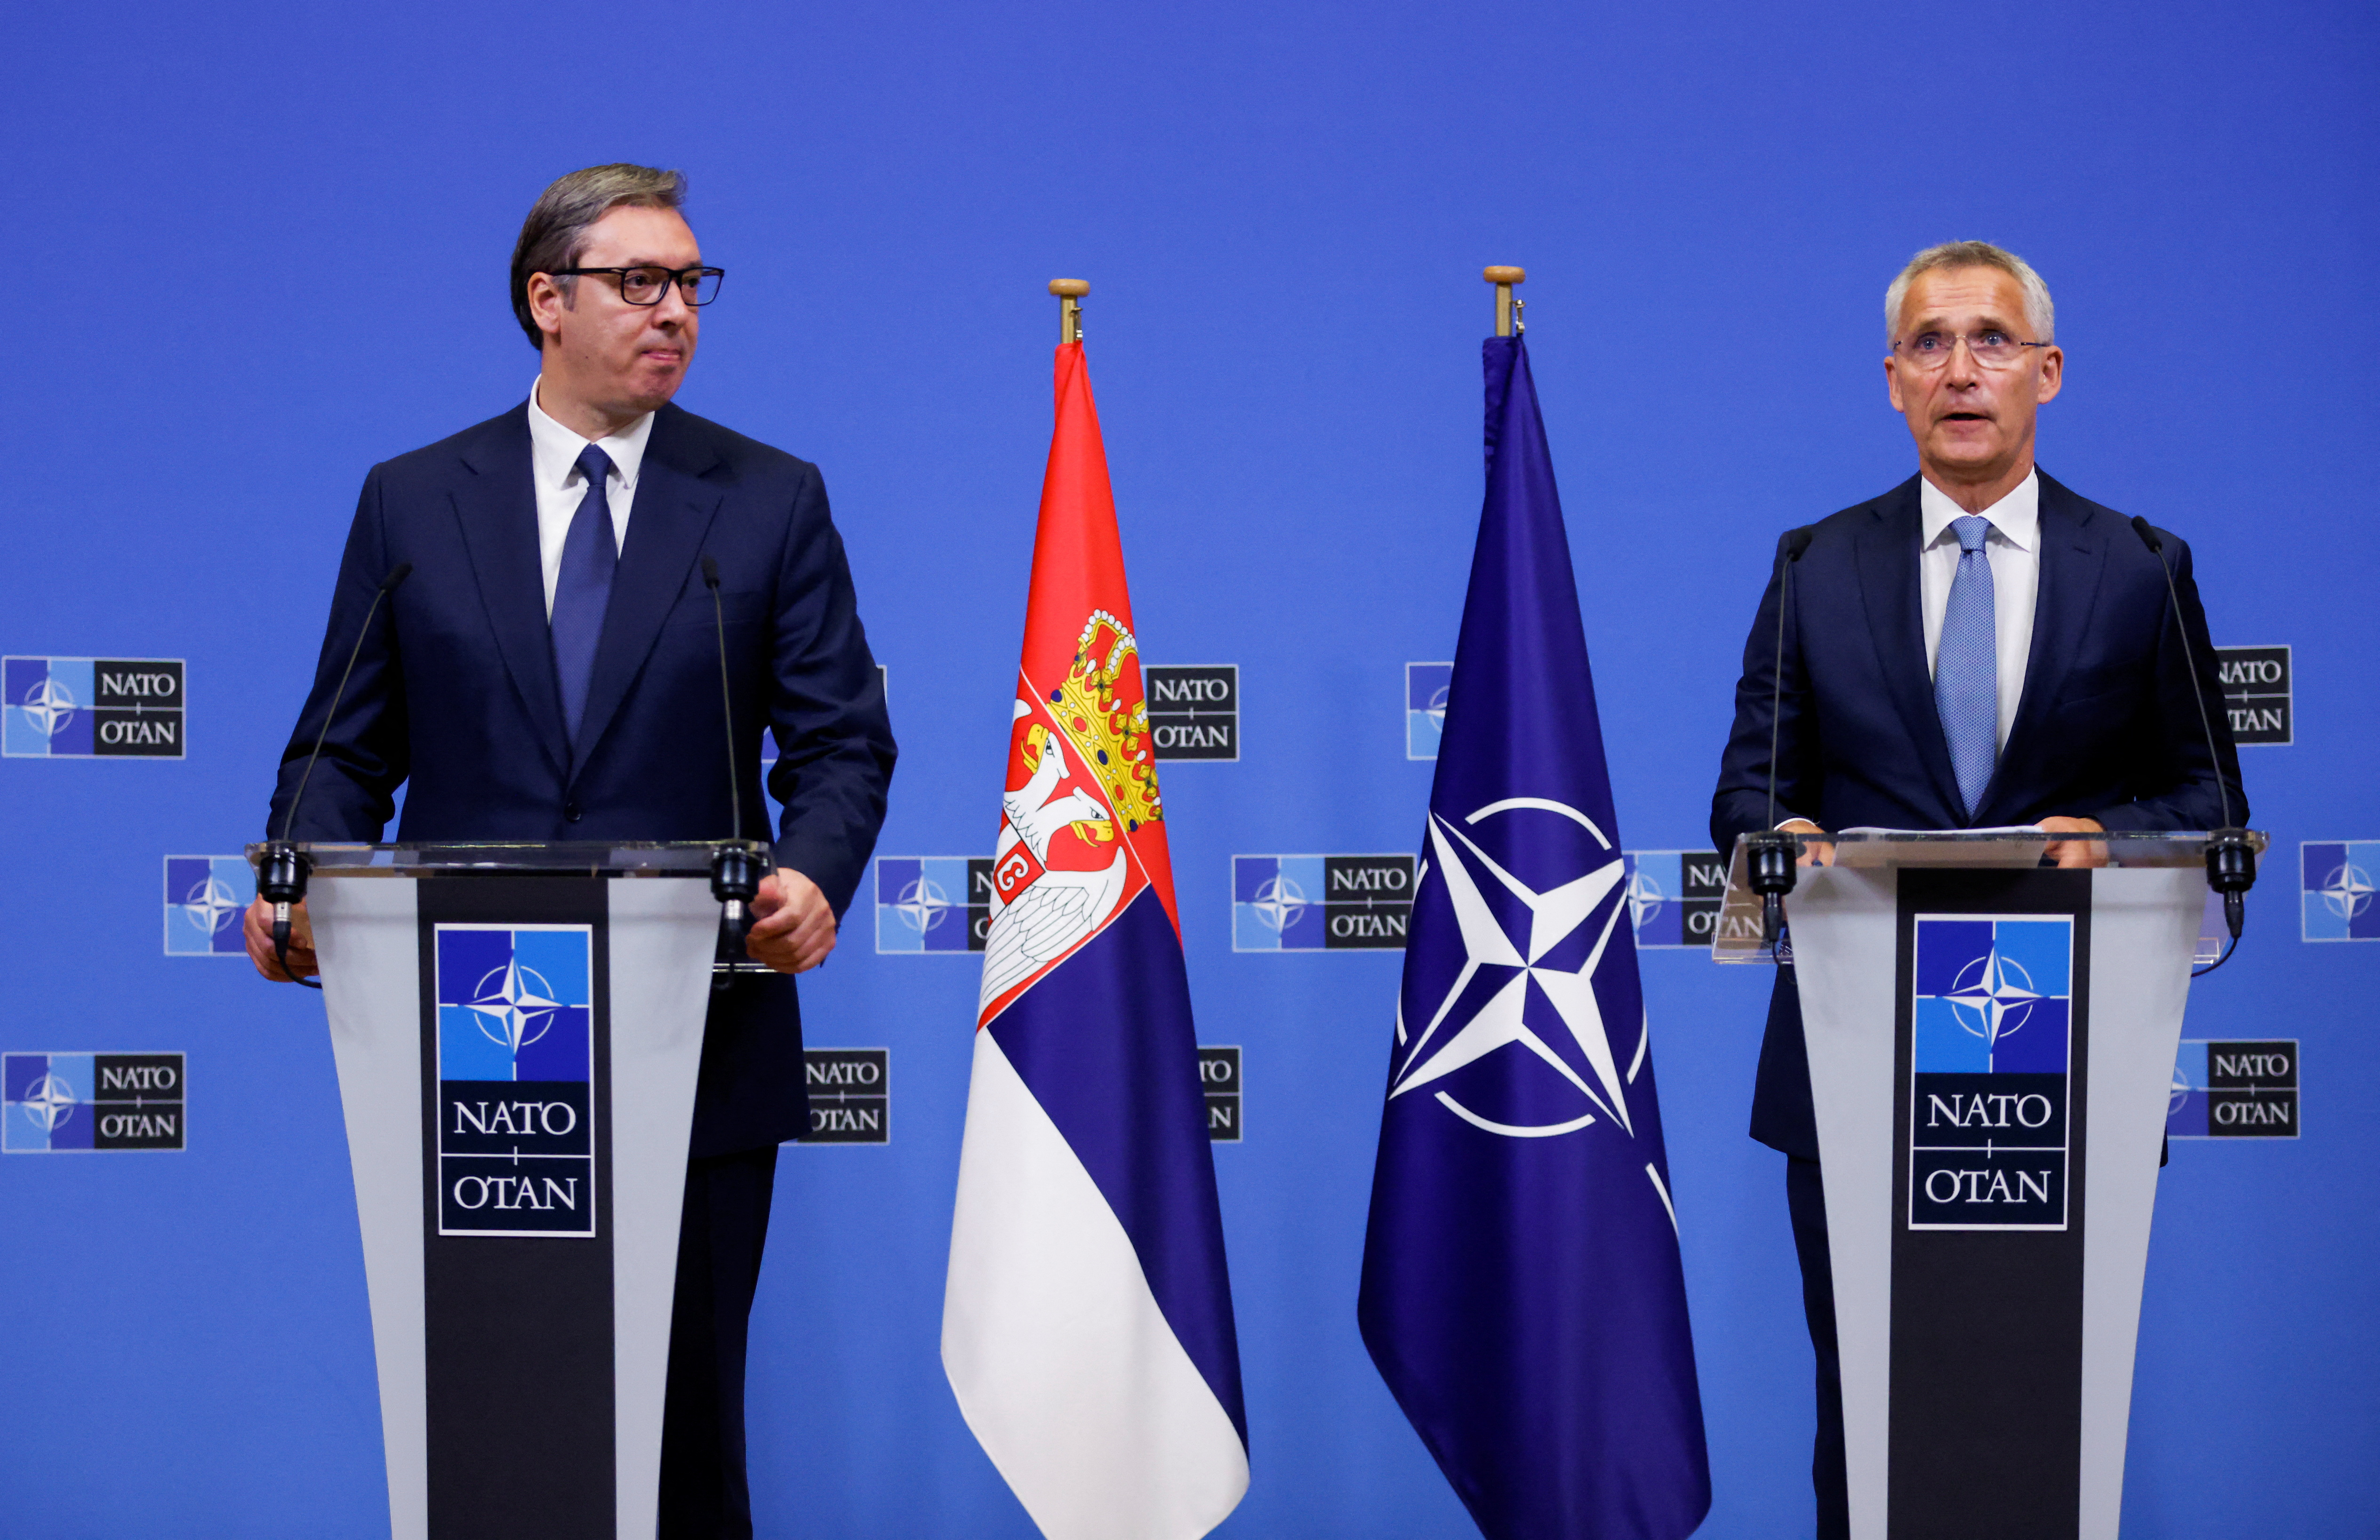 NATO's Stoltenberg meets Serbian President Vucic, in Brussels